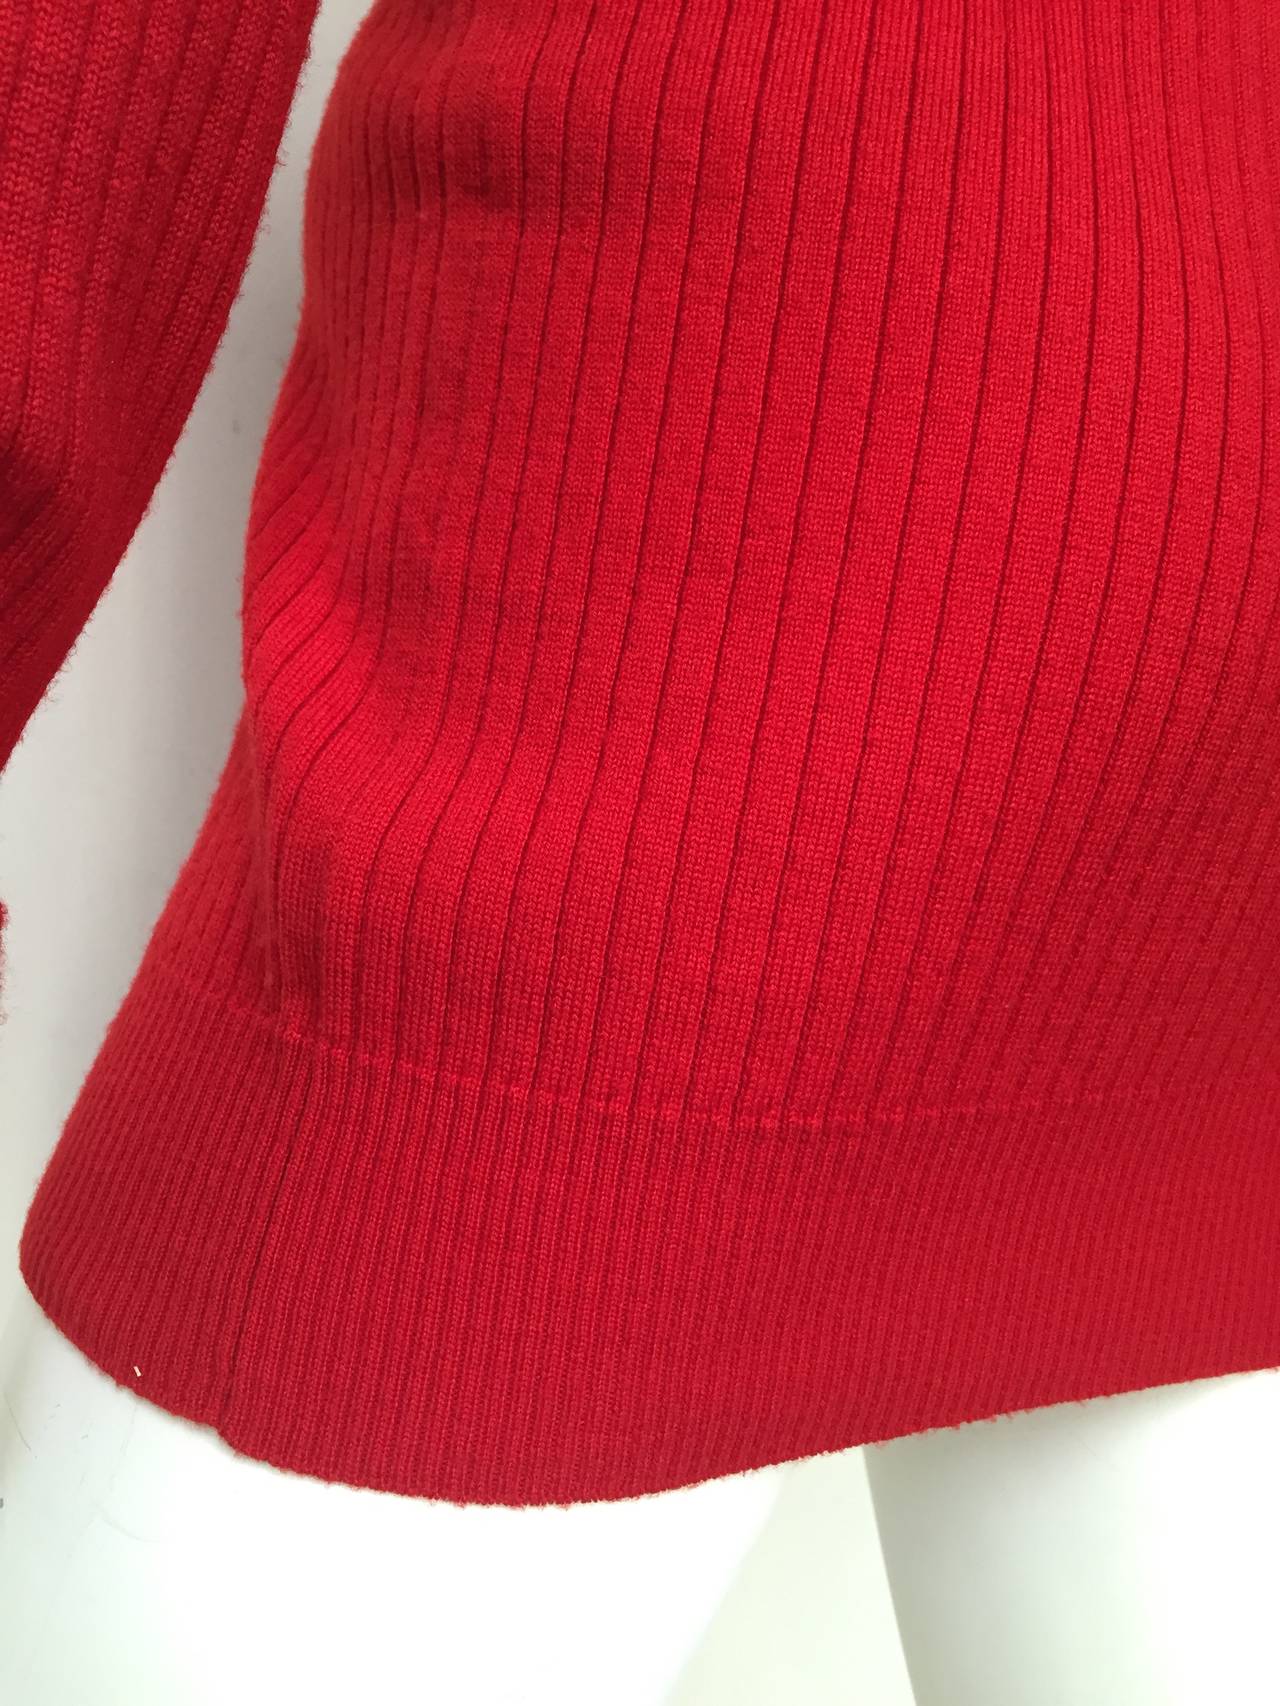 Chanel 80s Red Wool Knit Sweater Size 6. 1